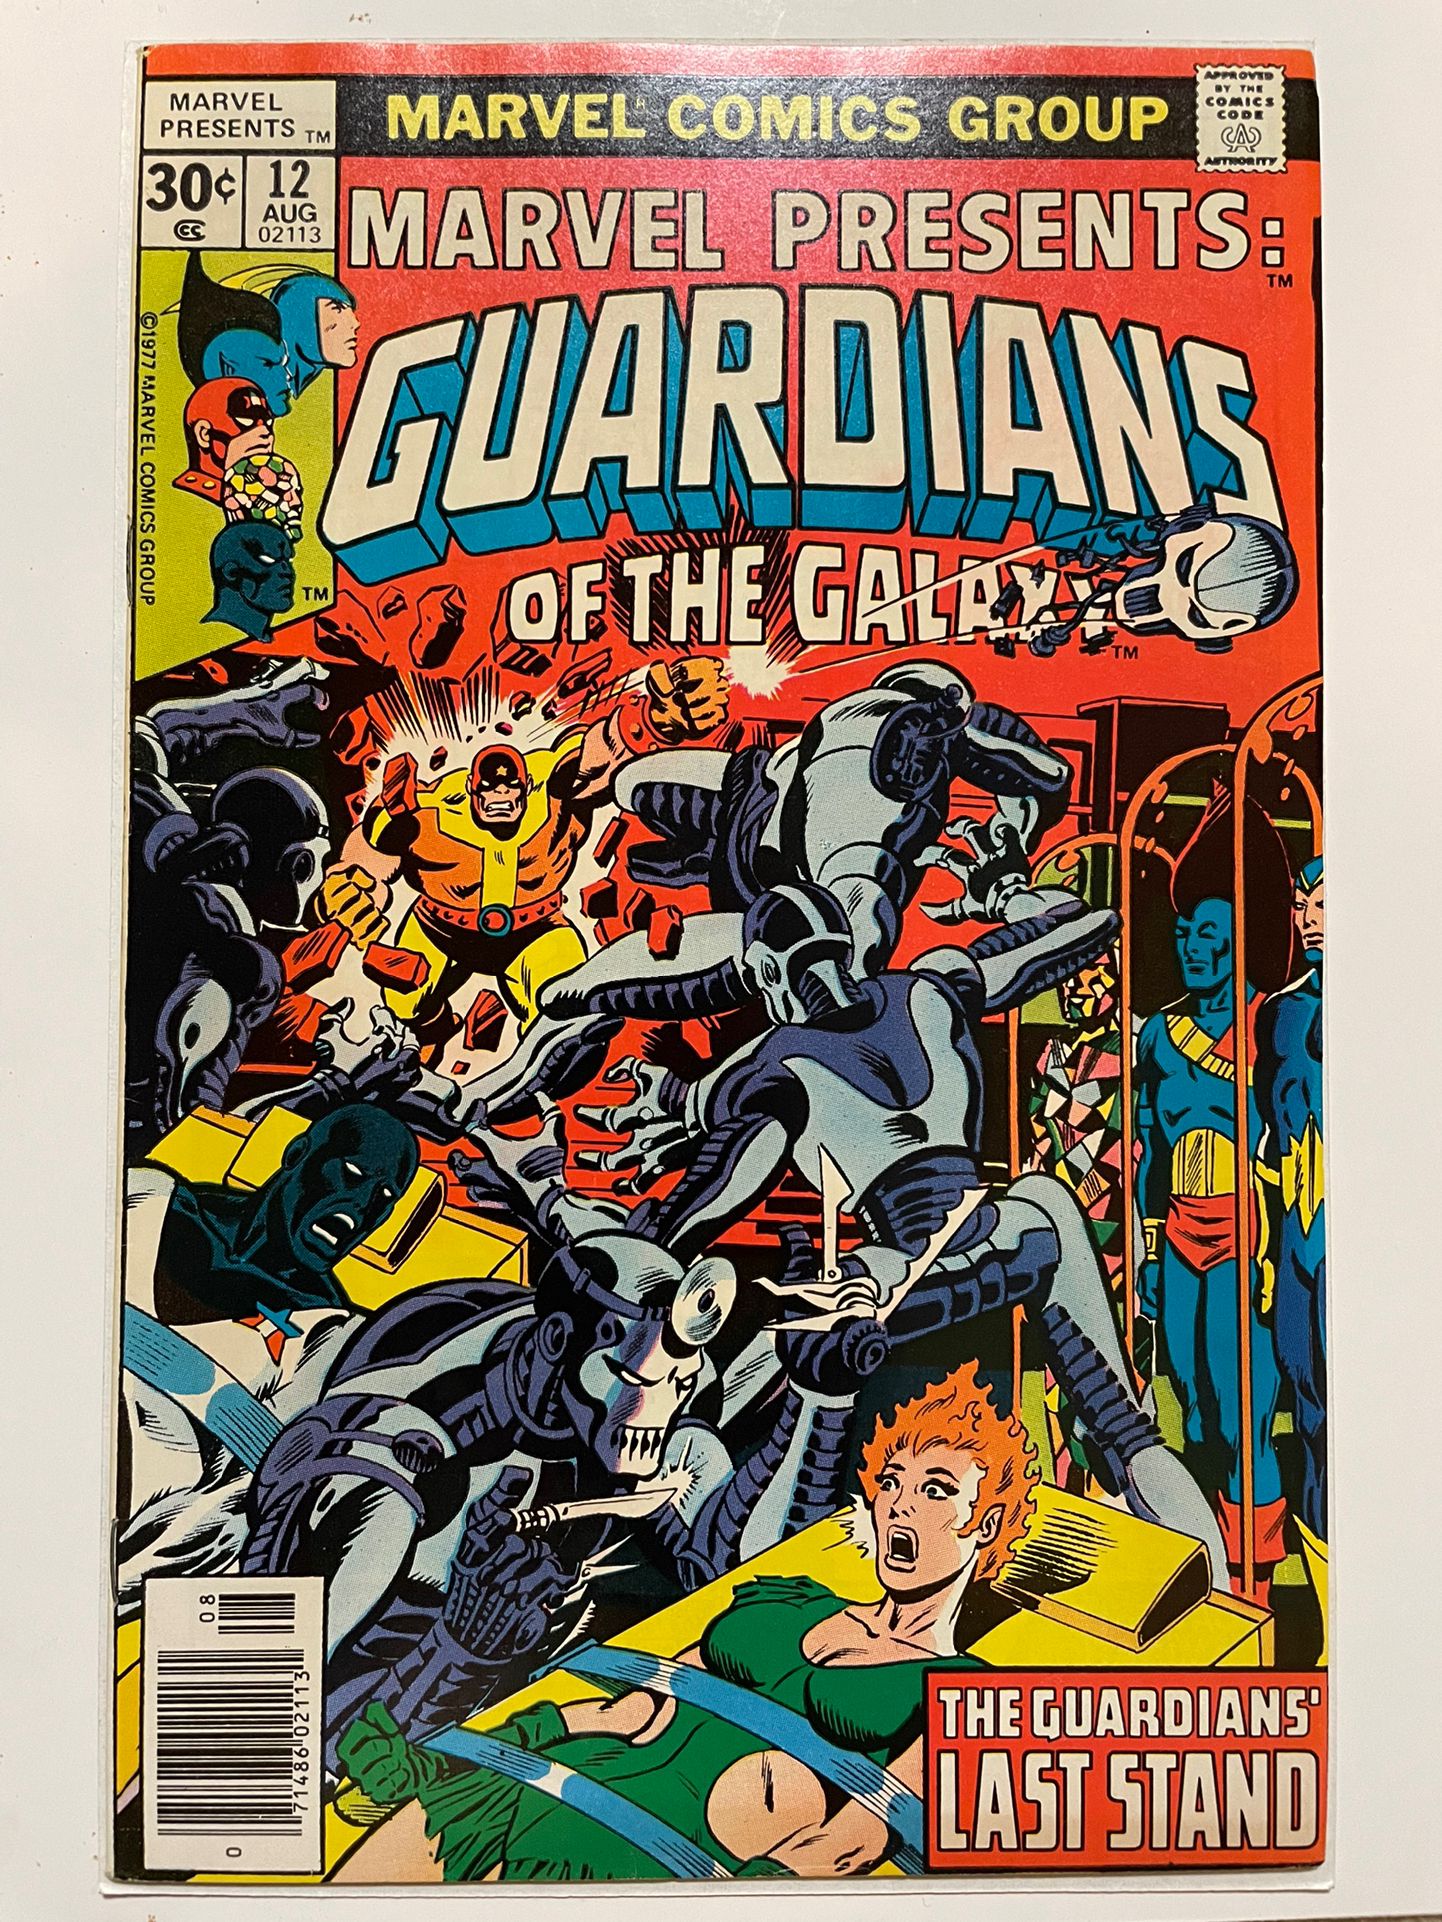 Marvel Presents #12 Early Solo Guardians, MCU, 70's!